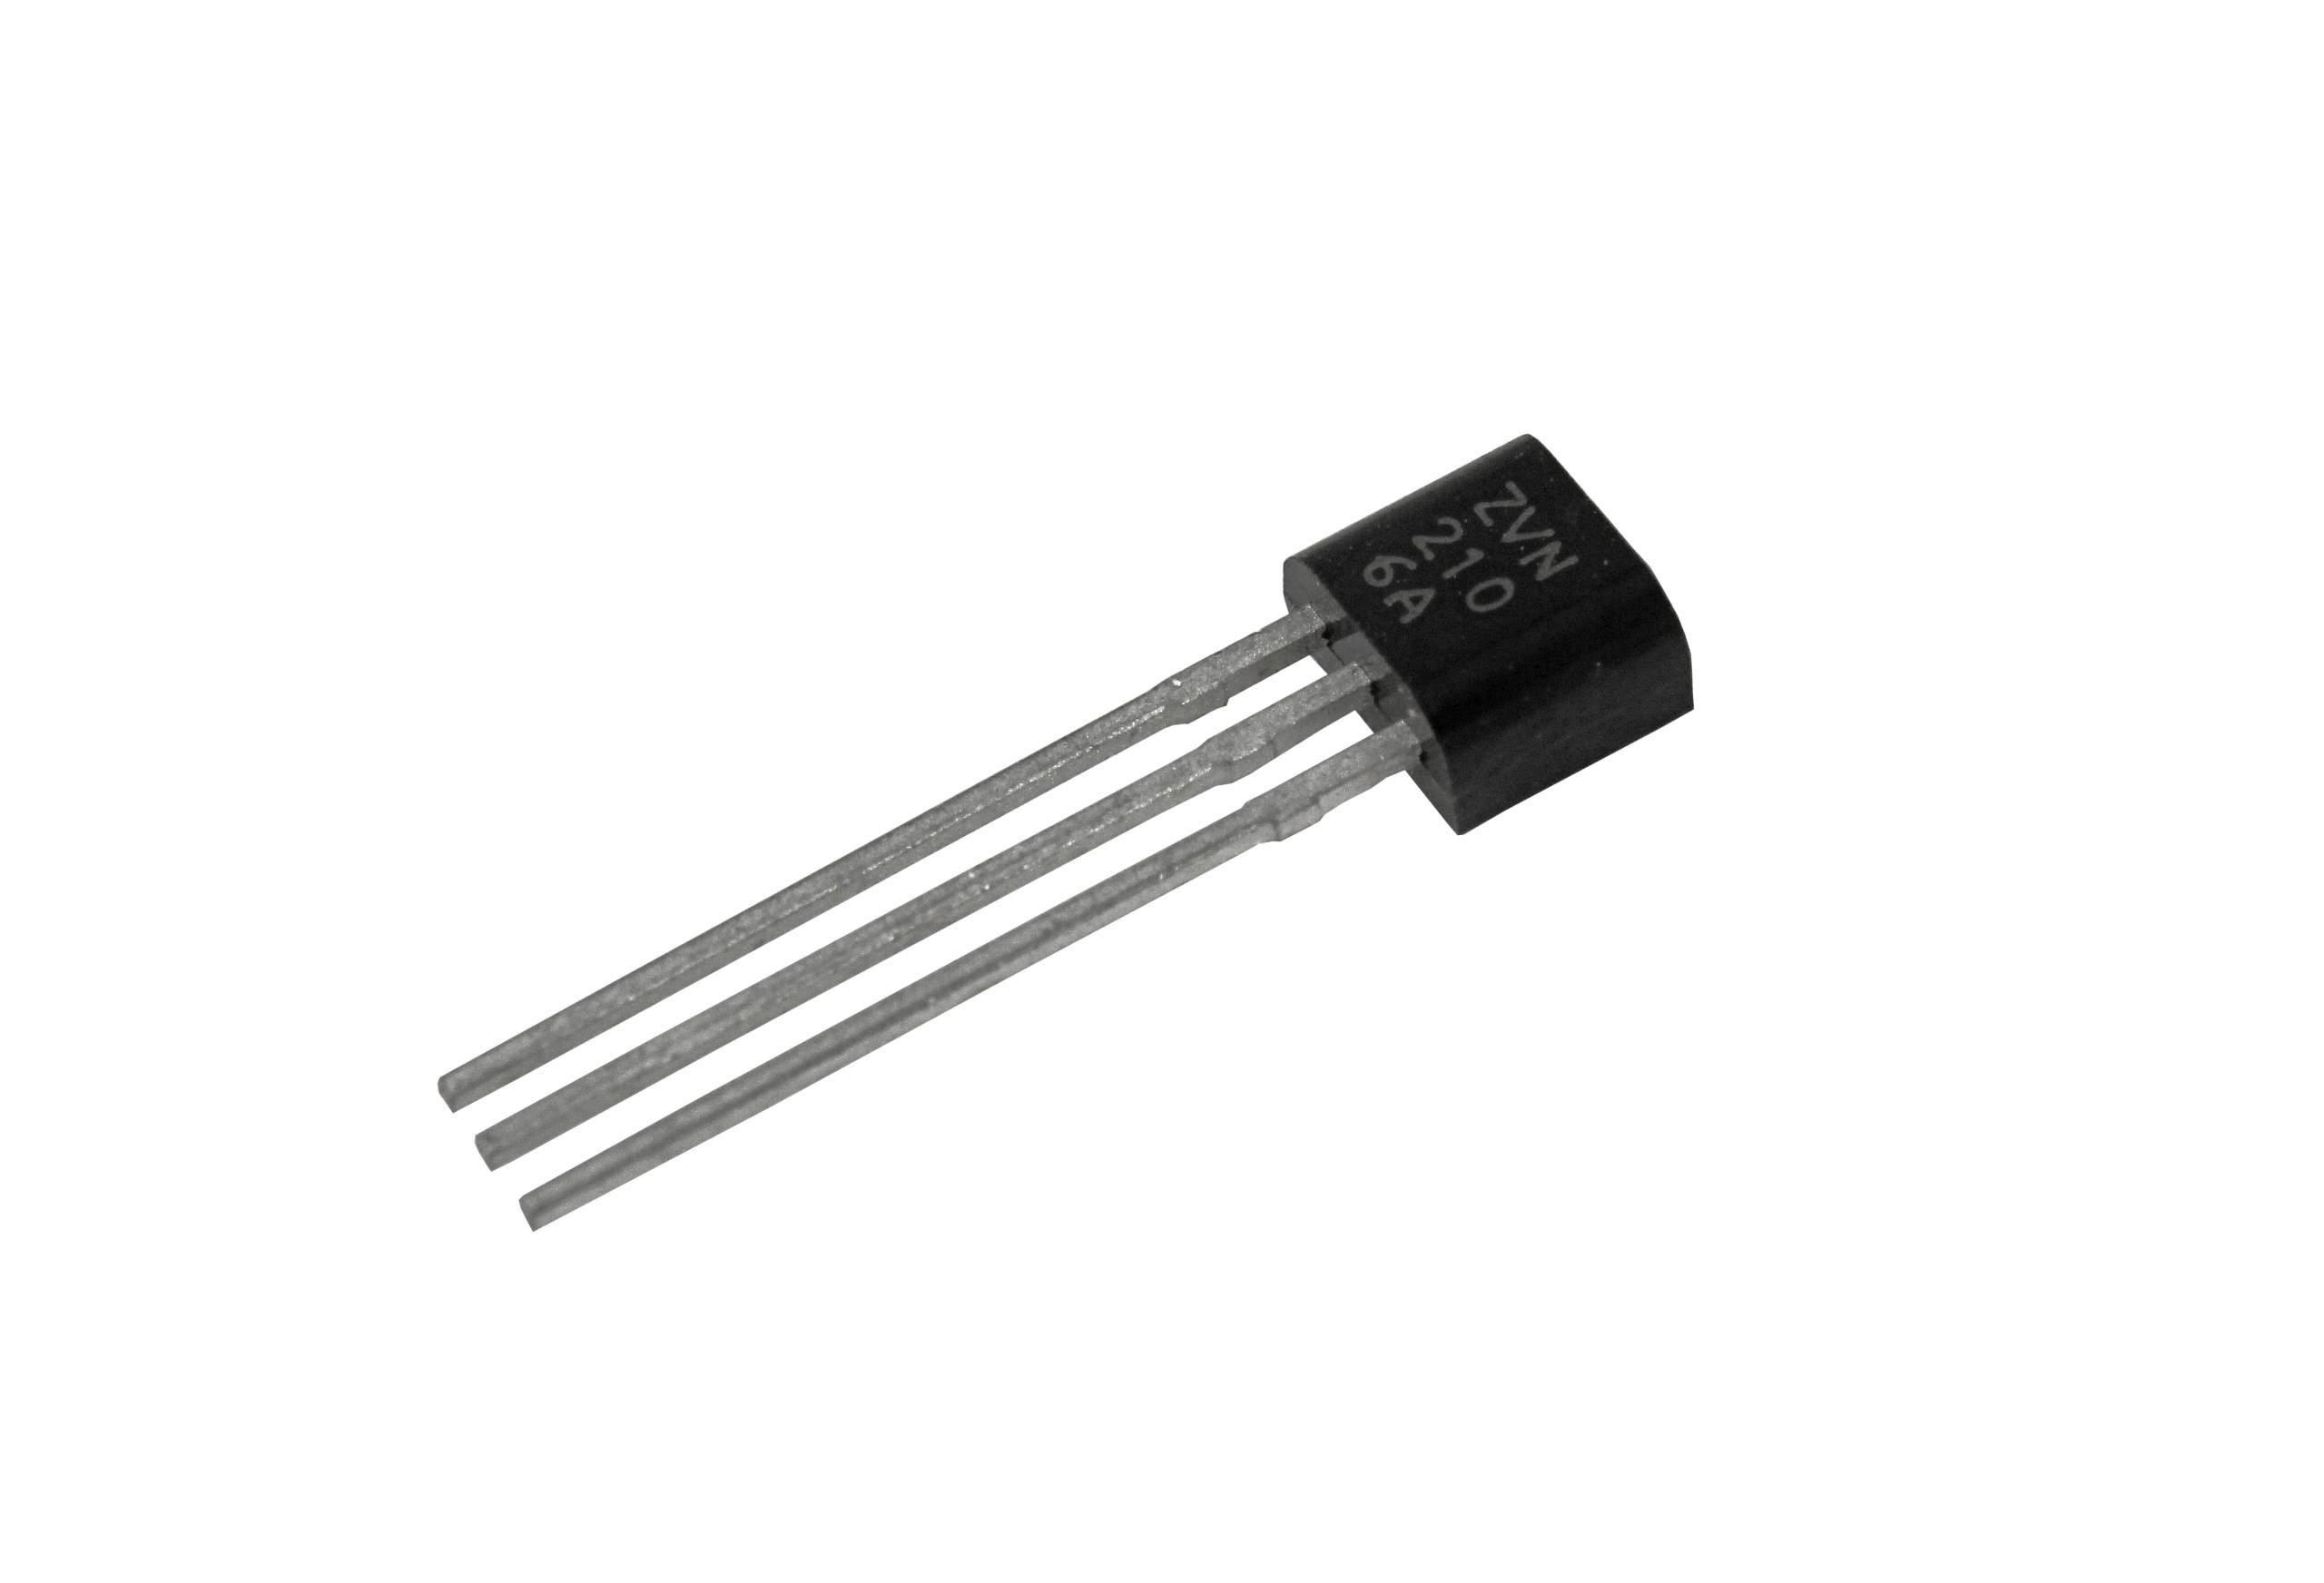 ZVN2106A N-MOSFET 60V 0.45 A 0.7 Вт TO92 E161